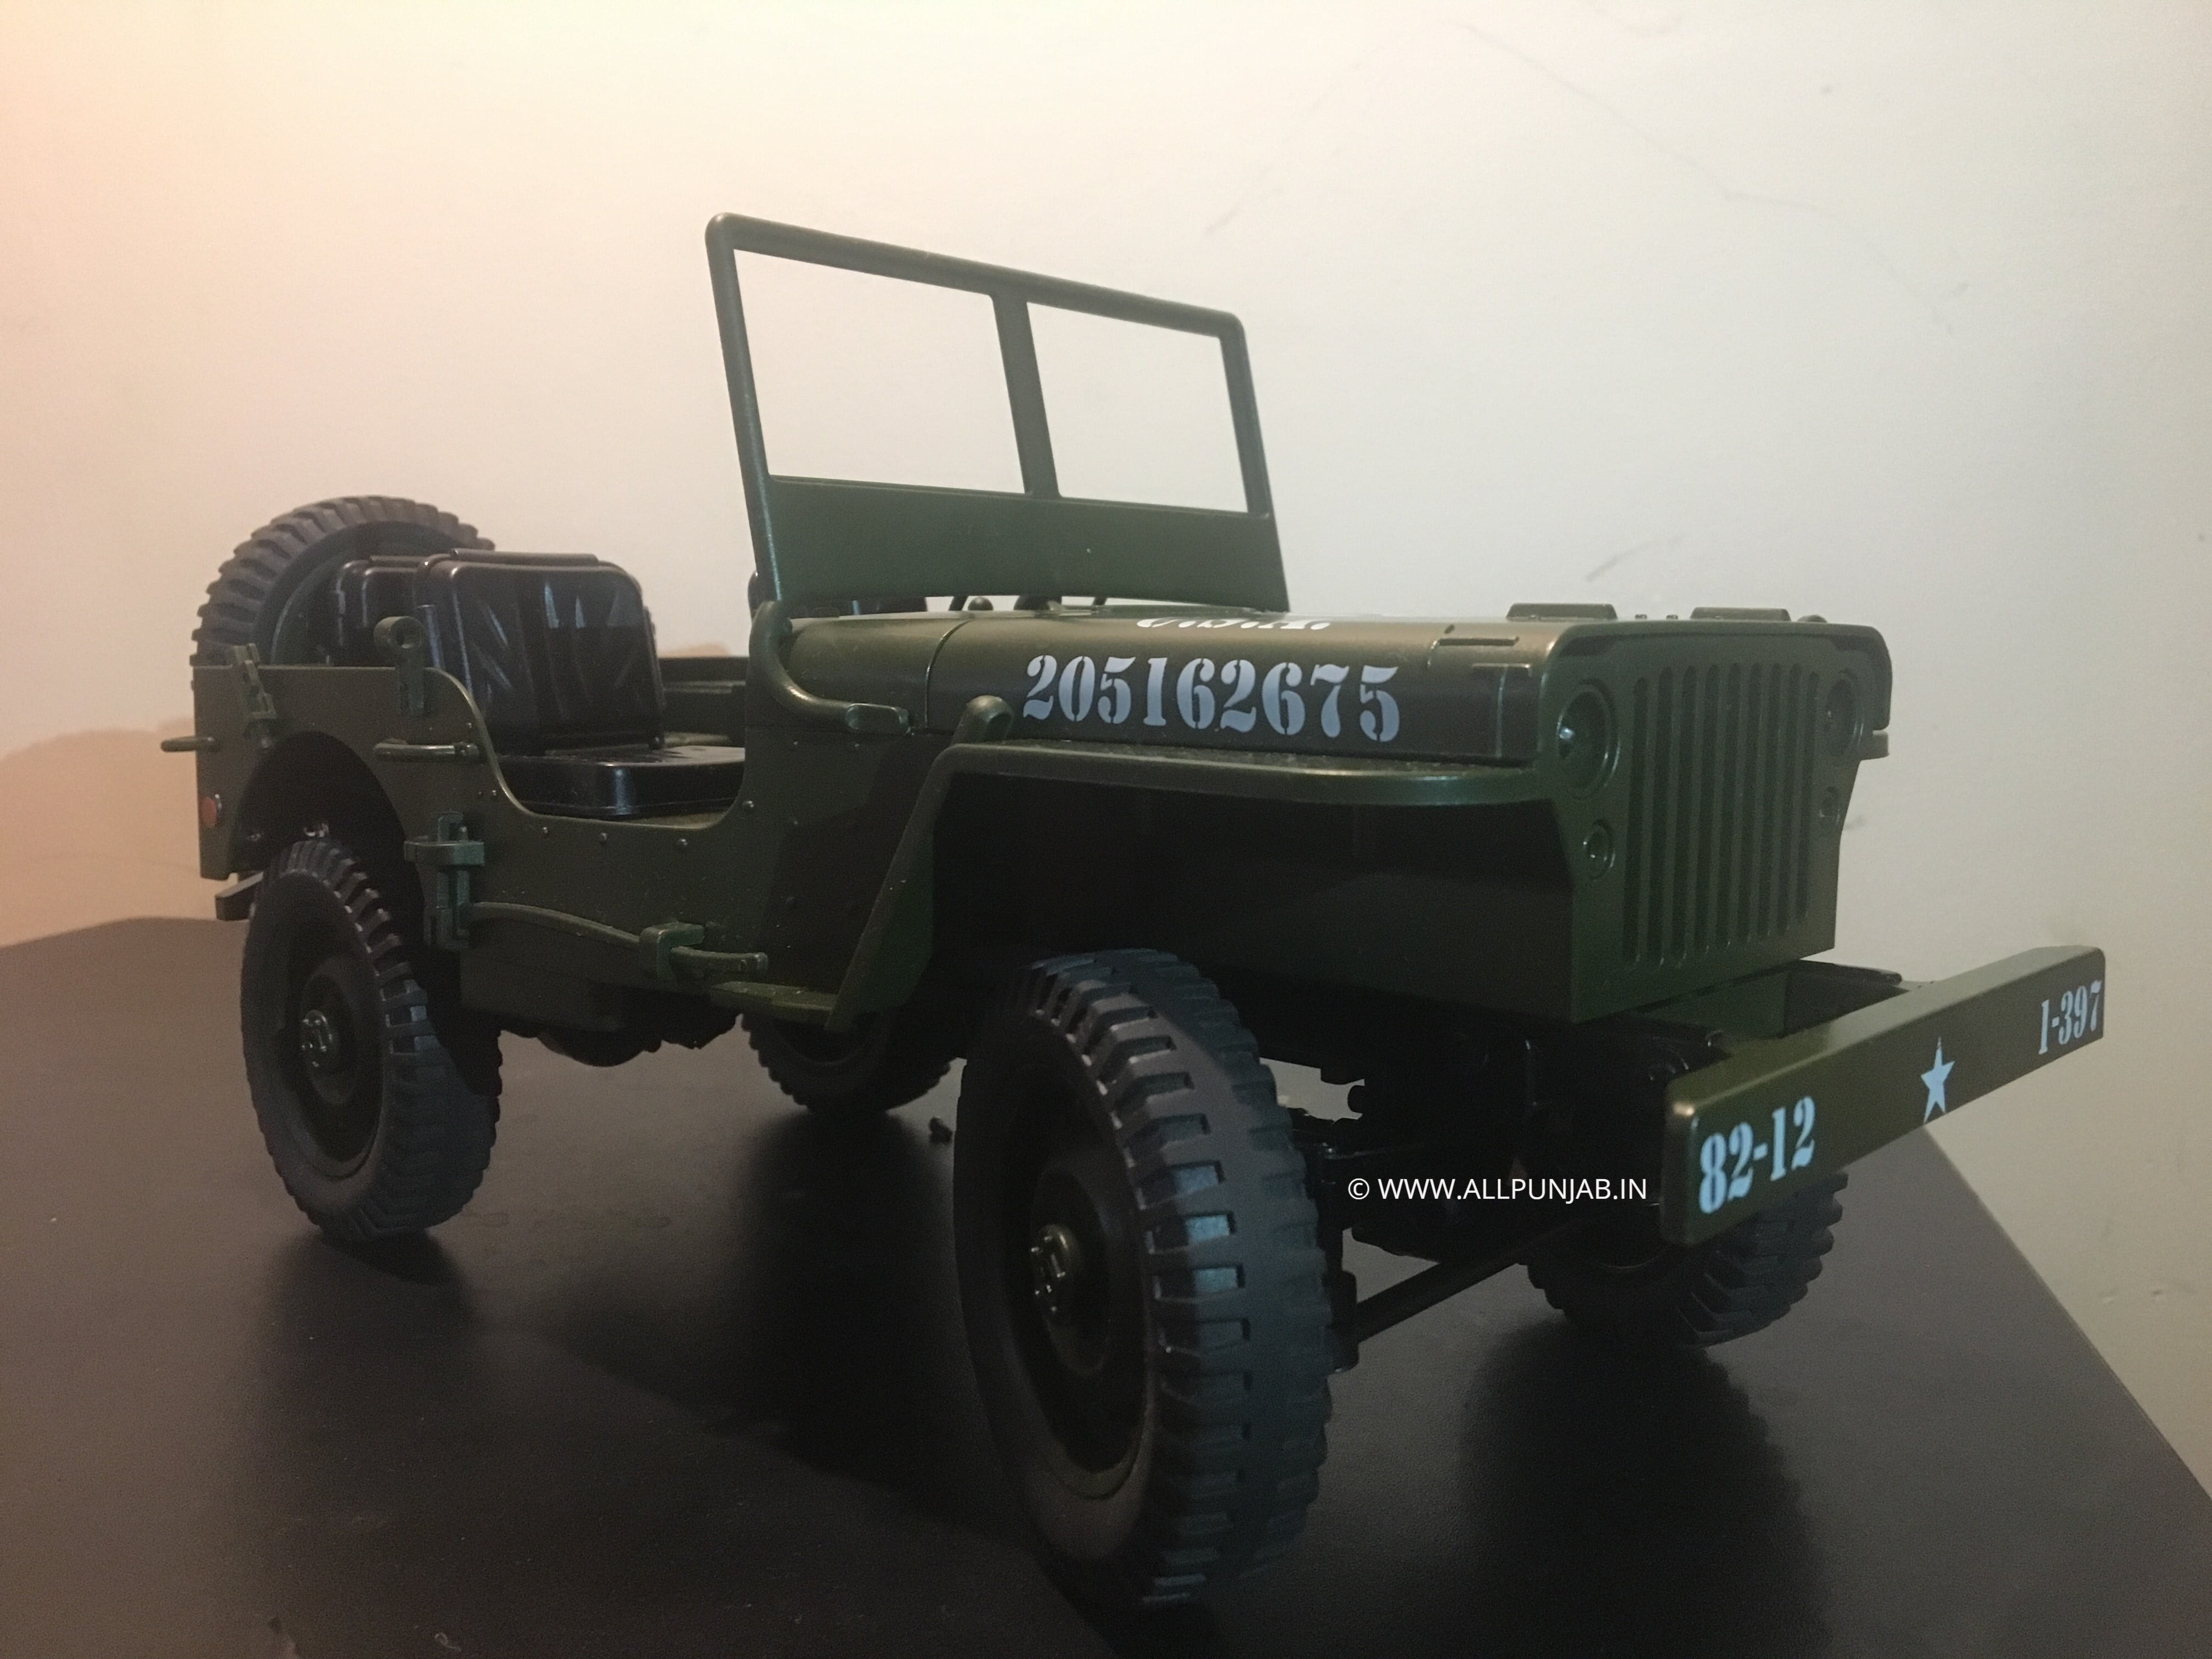 Willy  Jeep RC Toy